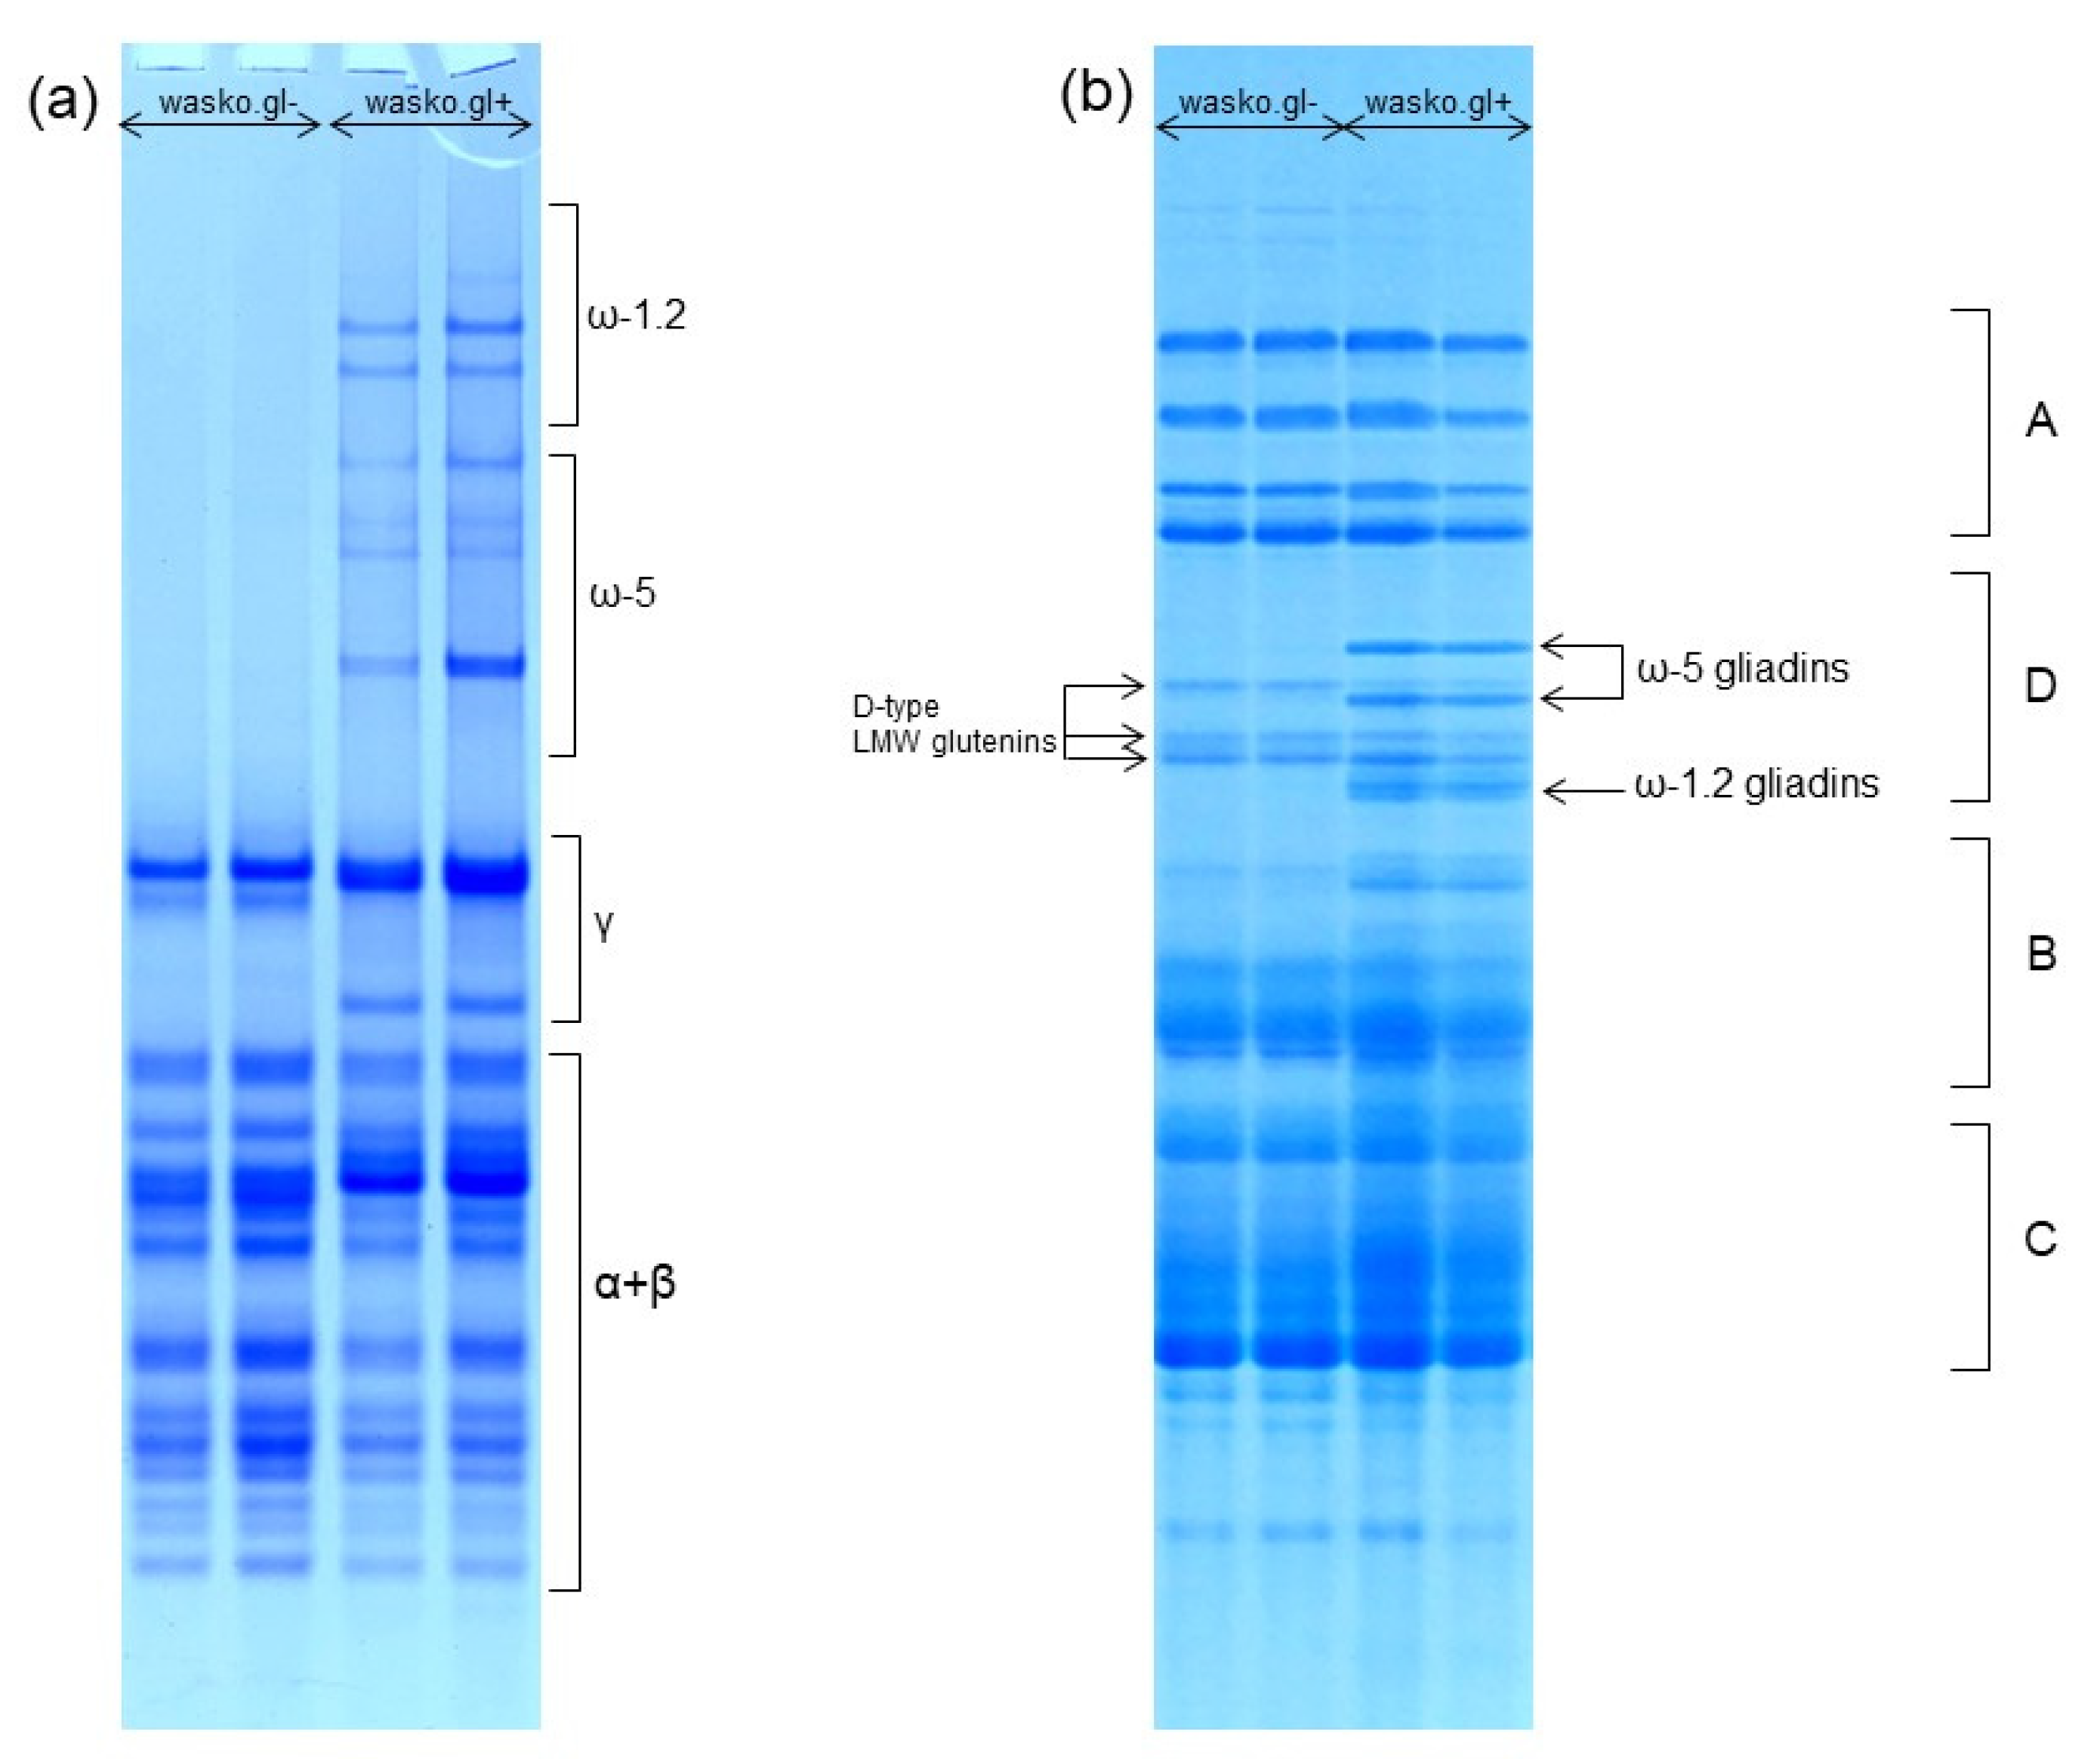 Molecules Free Full Text Ft Raman Spectroscopy As A Tool To Study The Secondary Structures Of Wheat Gliadin Proteins Html